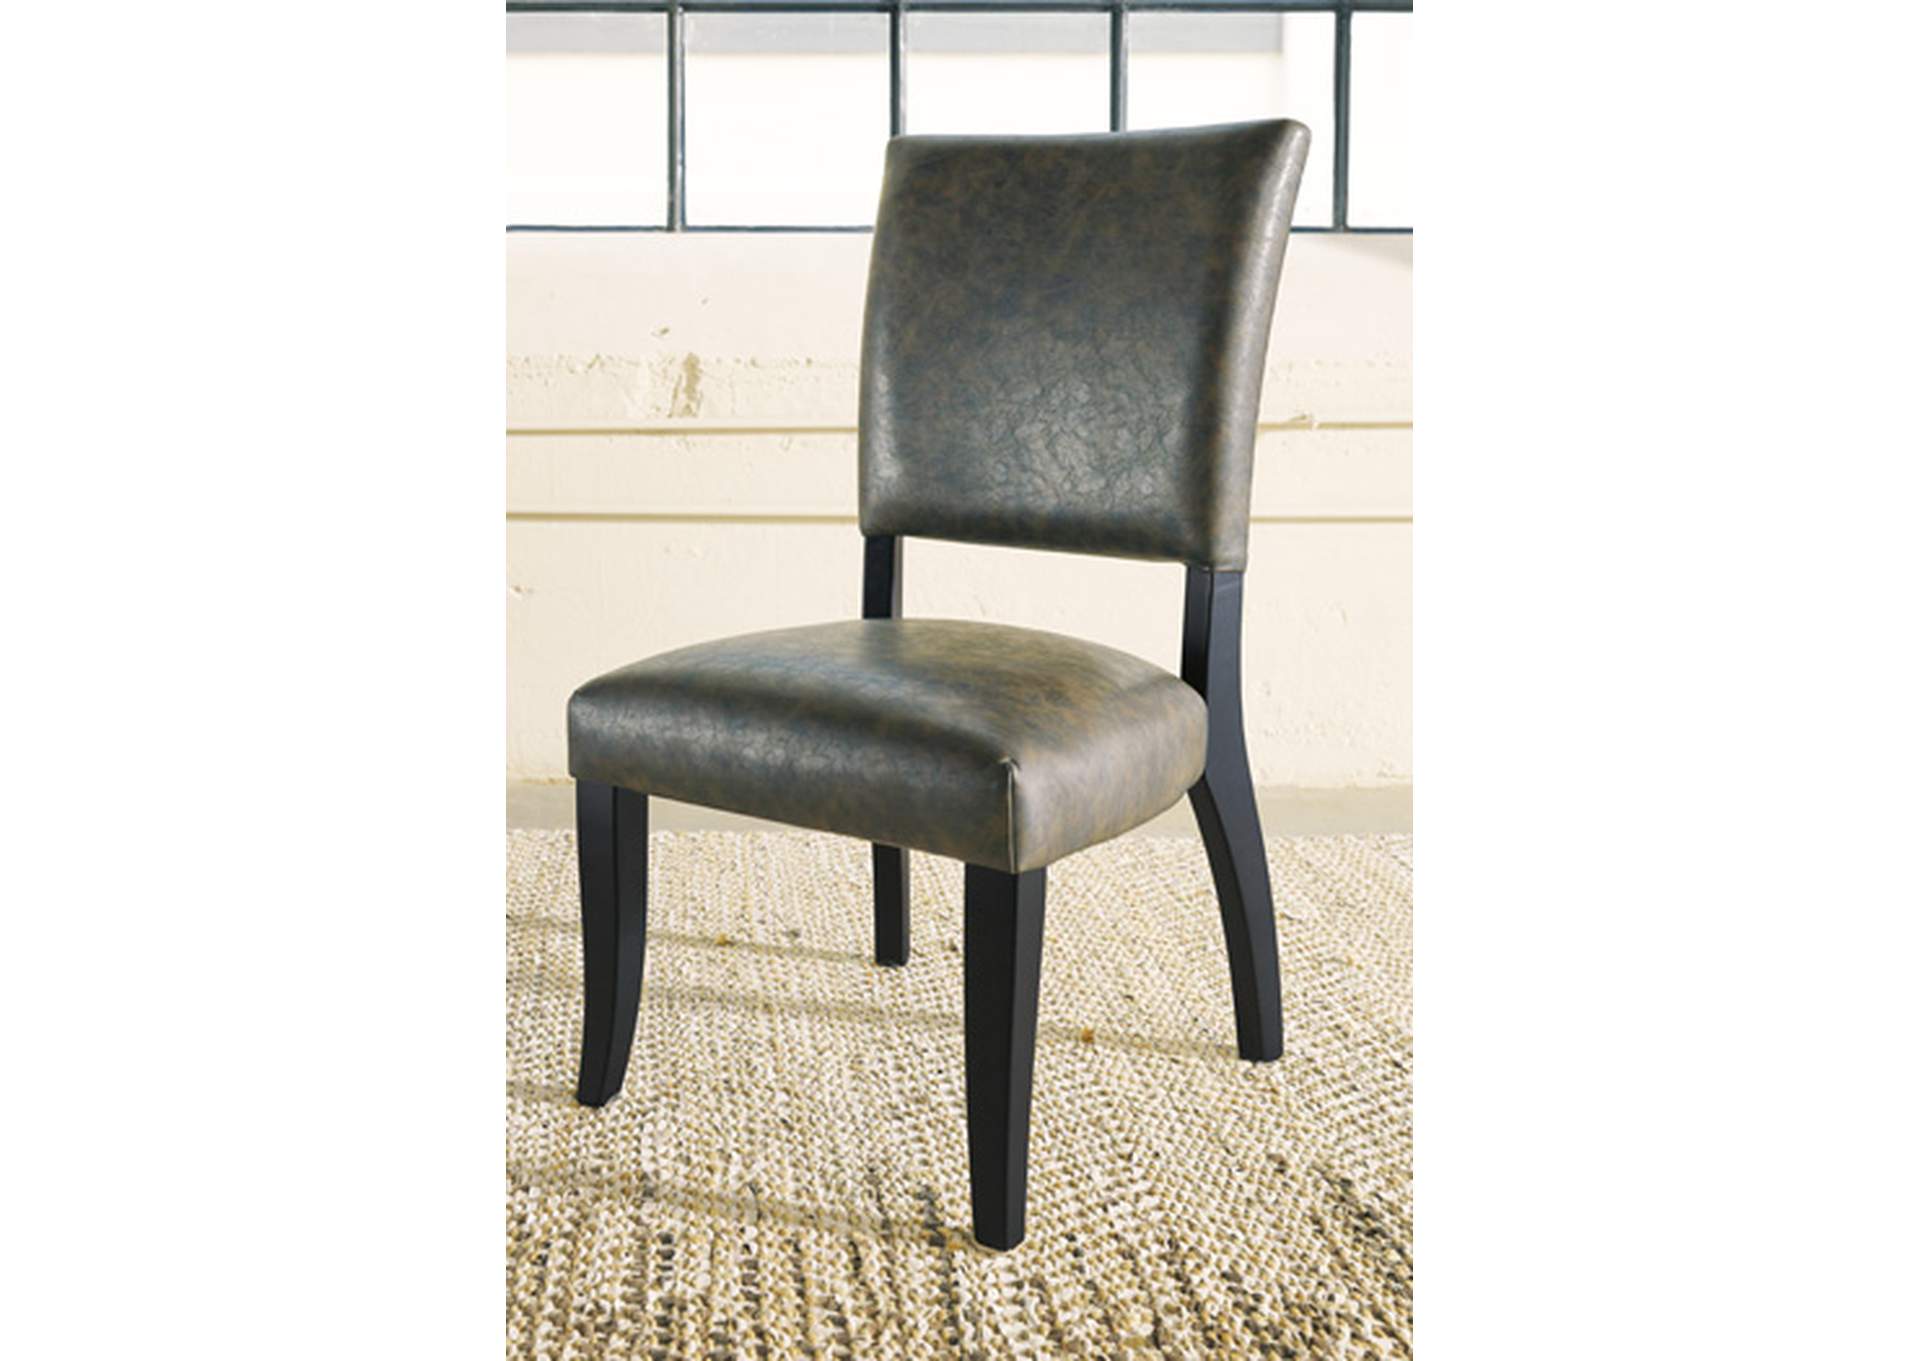 Sommerford Dining Room Chair Ashley, Ashley Furniture Leather Dining Room Chairs